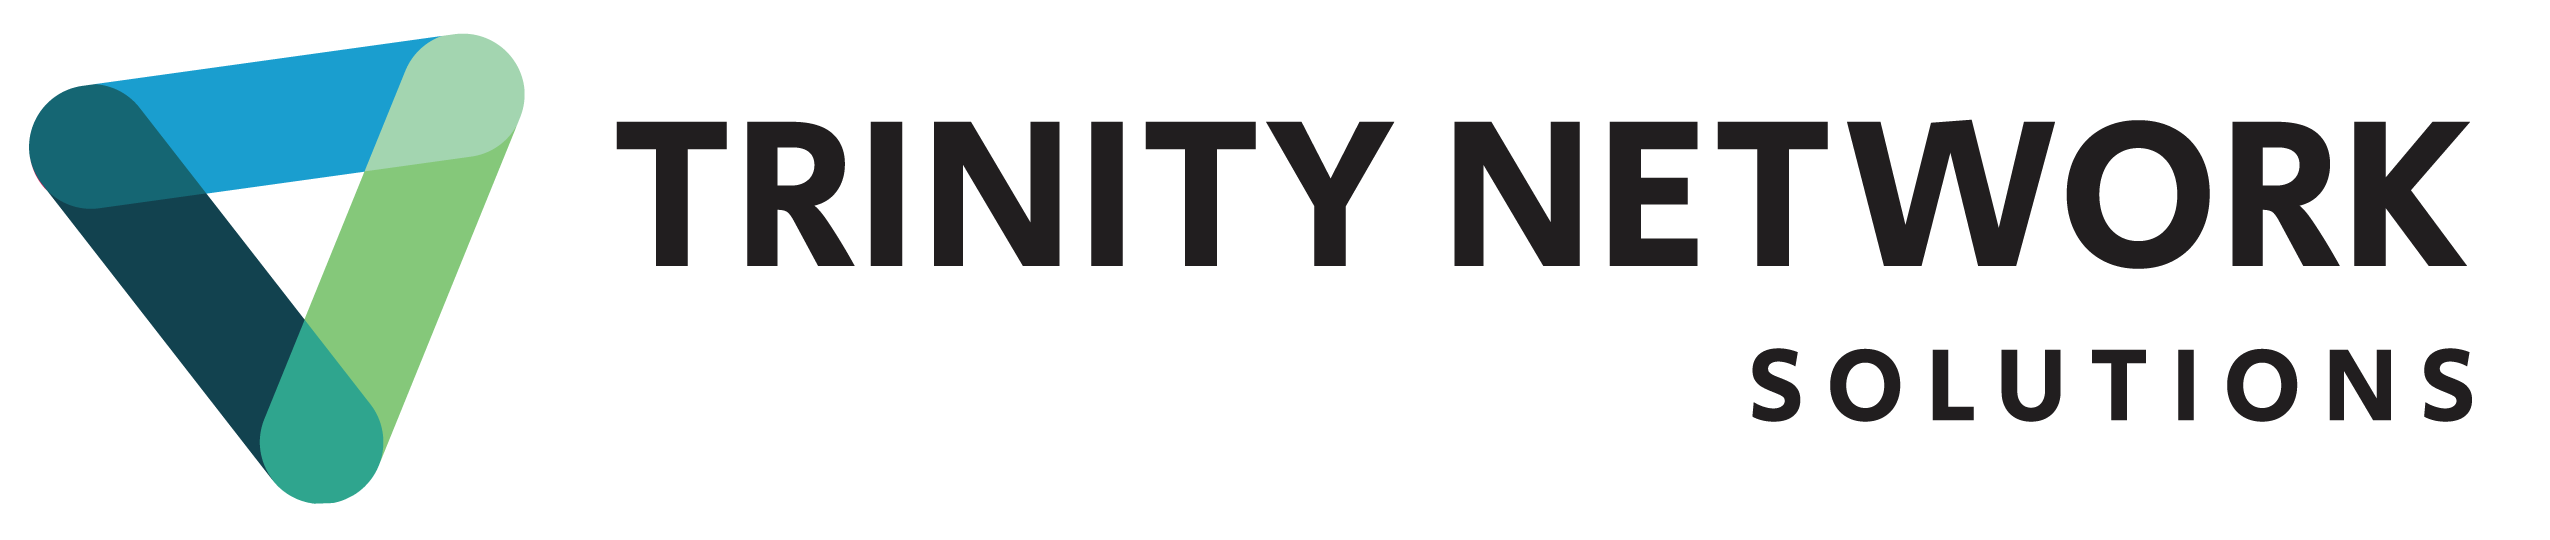 Trinity Network Solutions